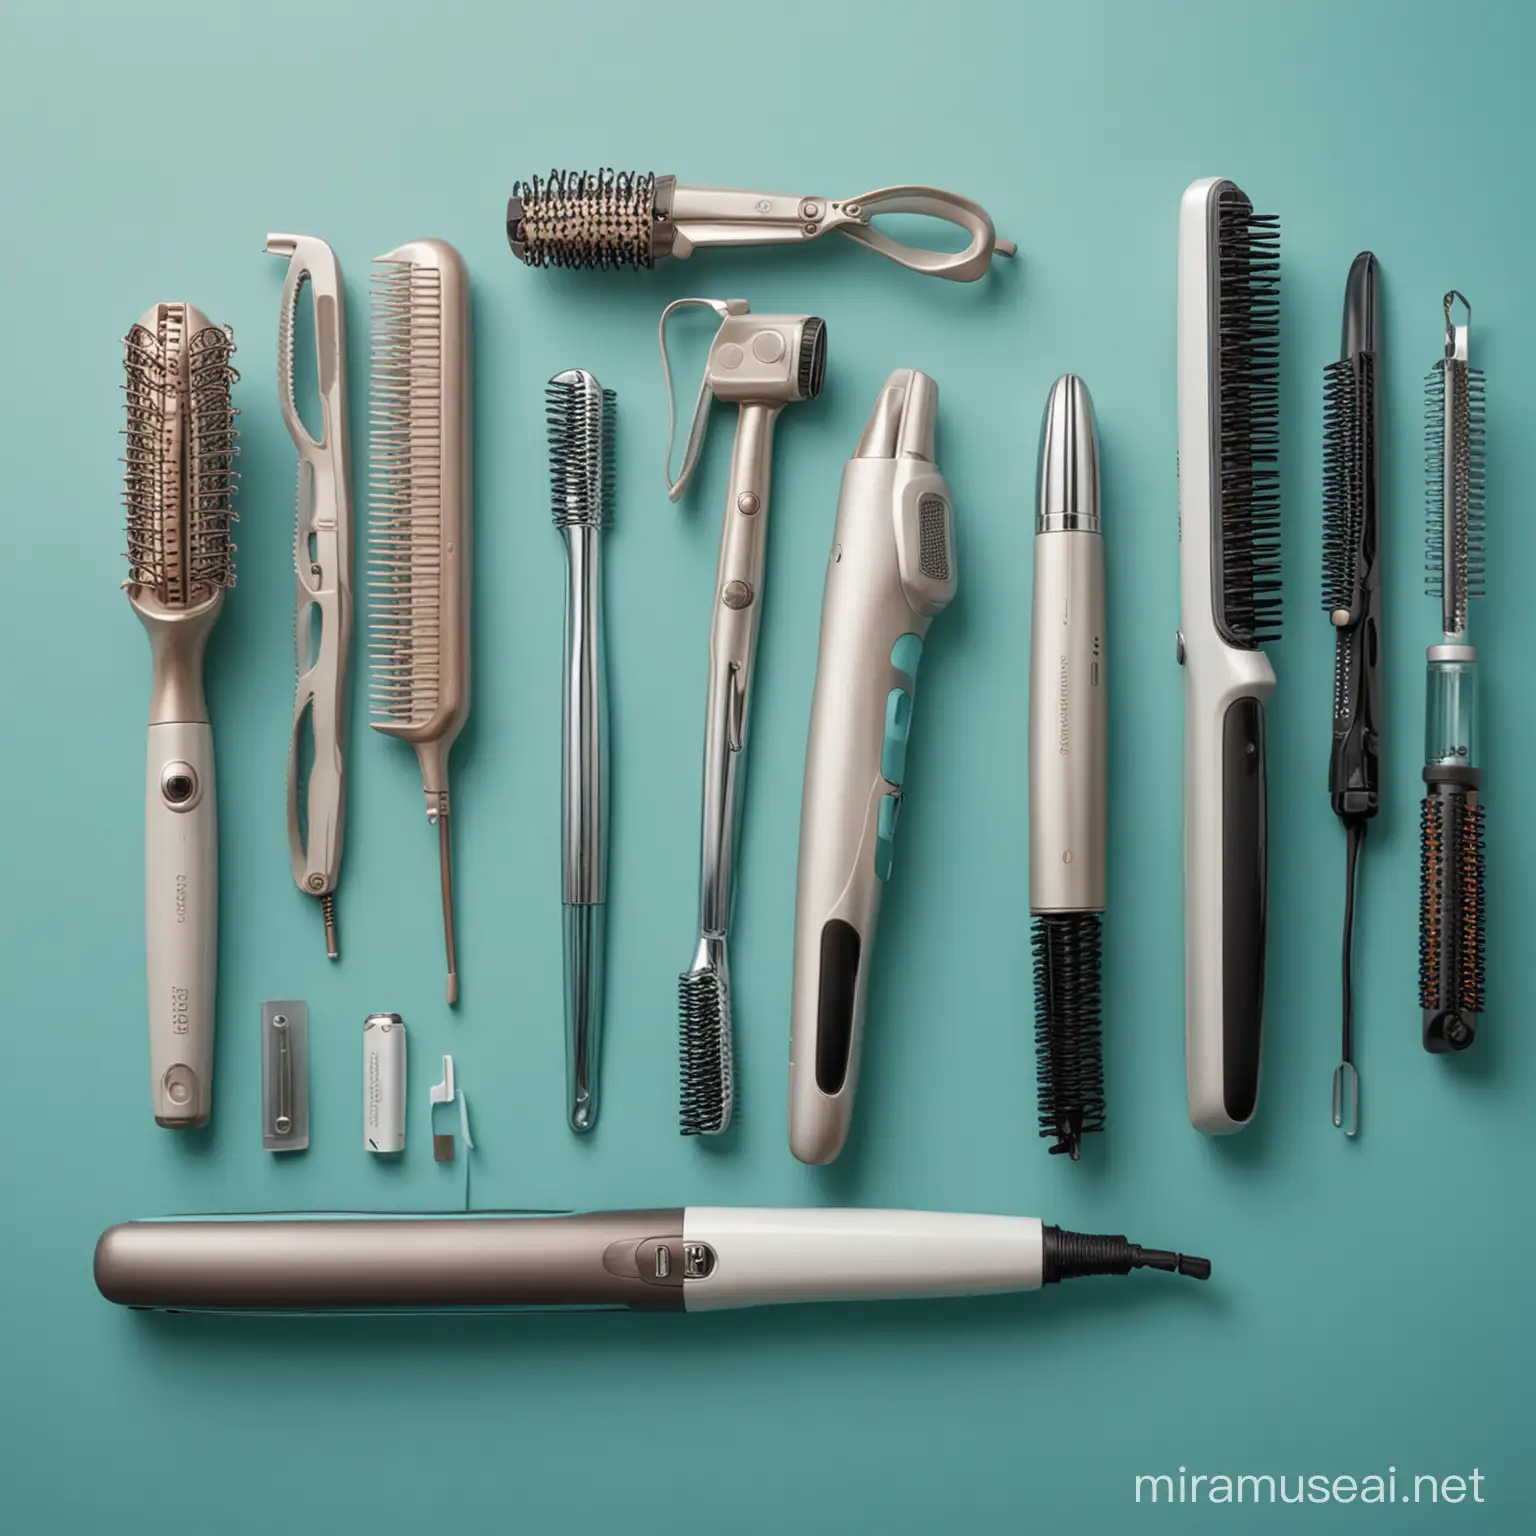 hair straightener, curling irons and other hair tools in a teal background